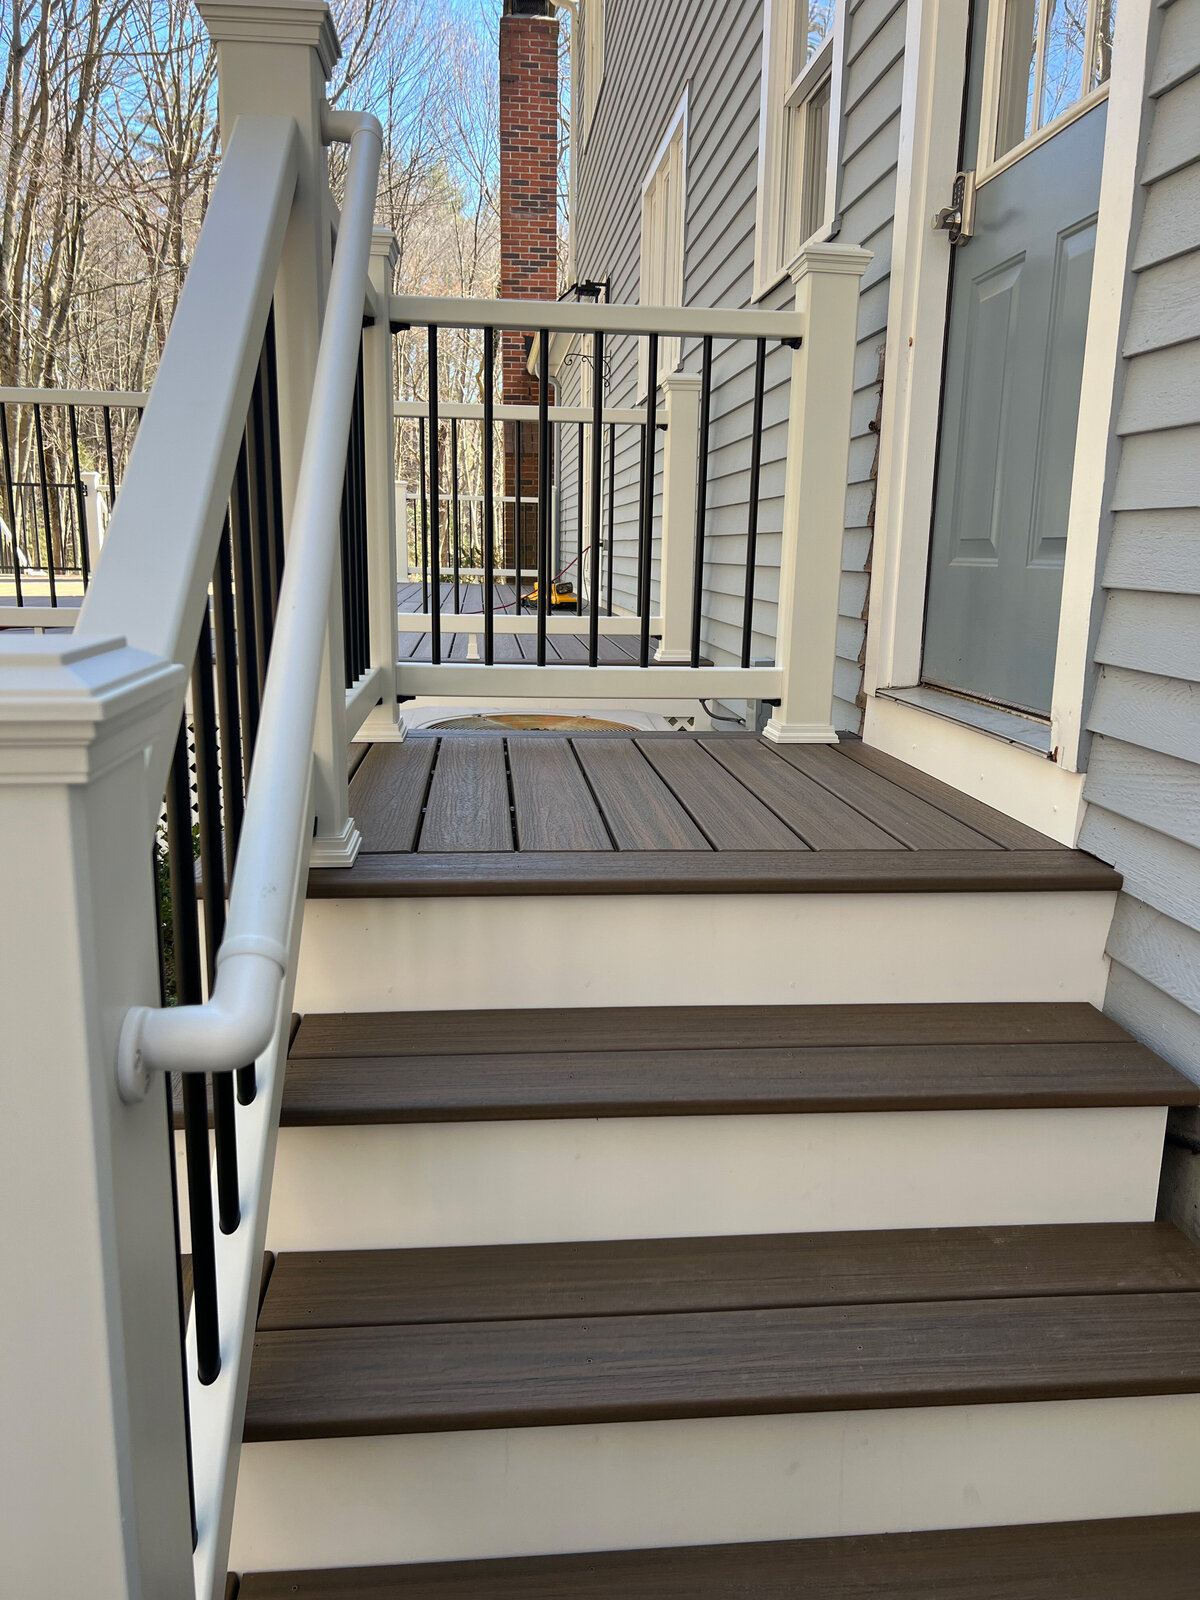 A set of stairs out of dark composite and white PVC railings